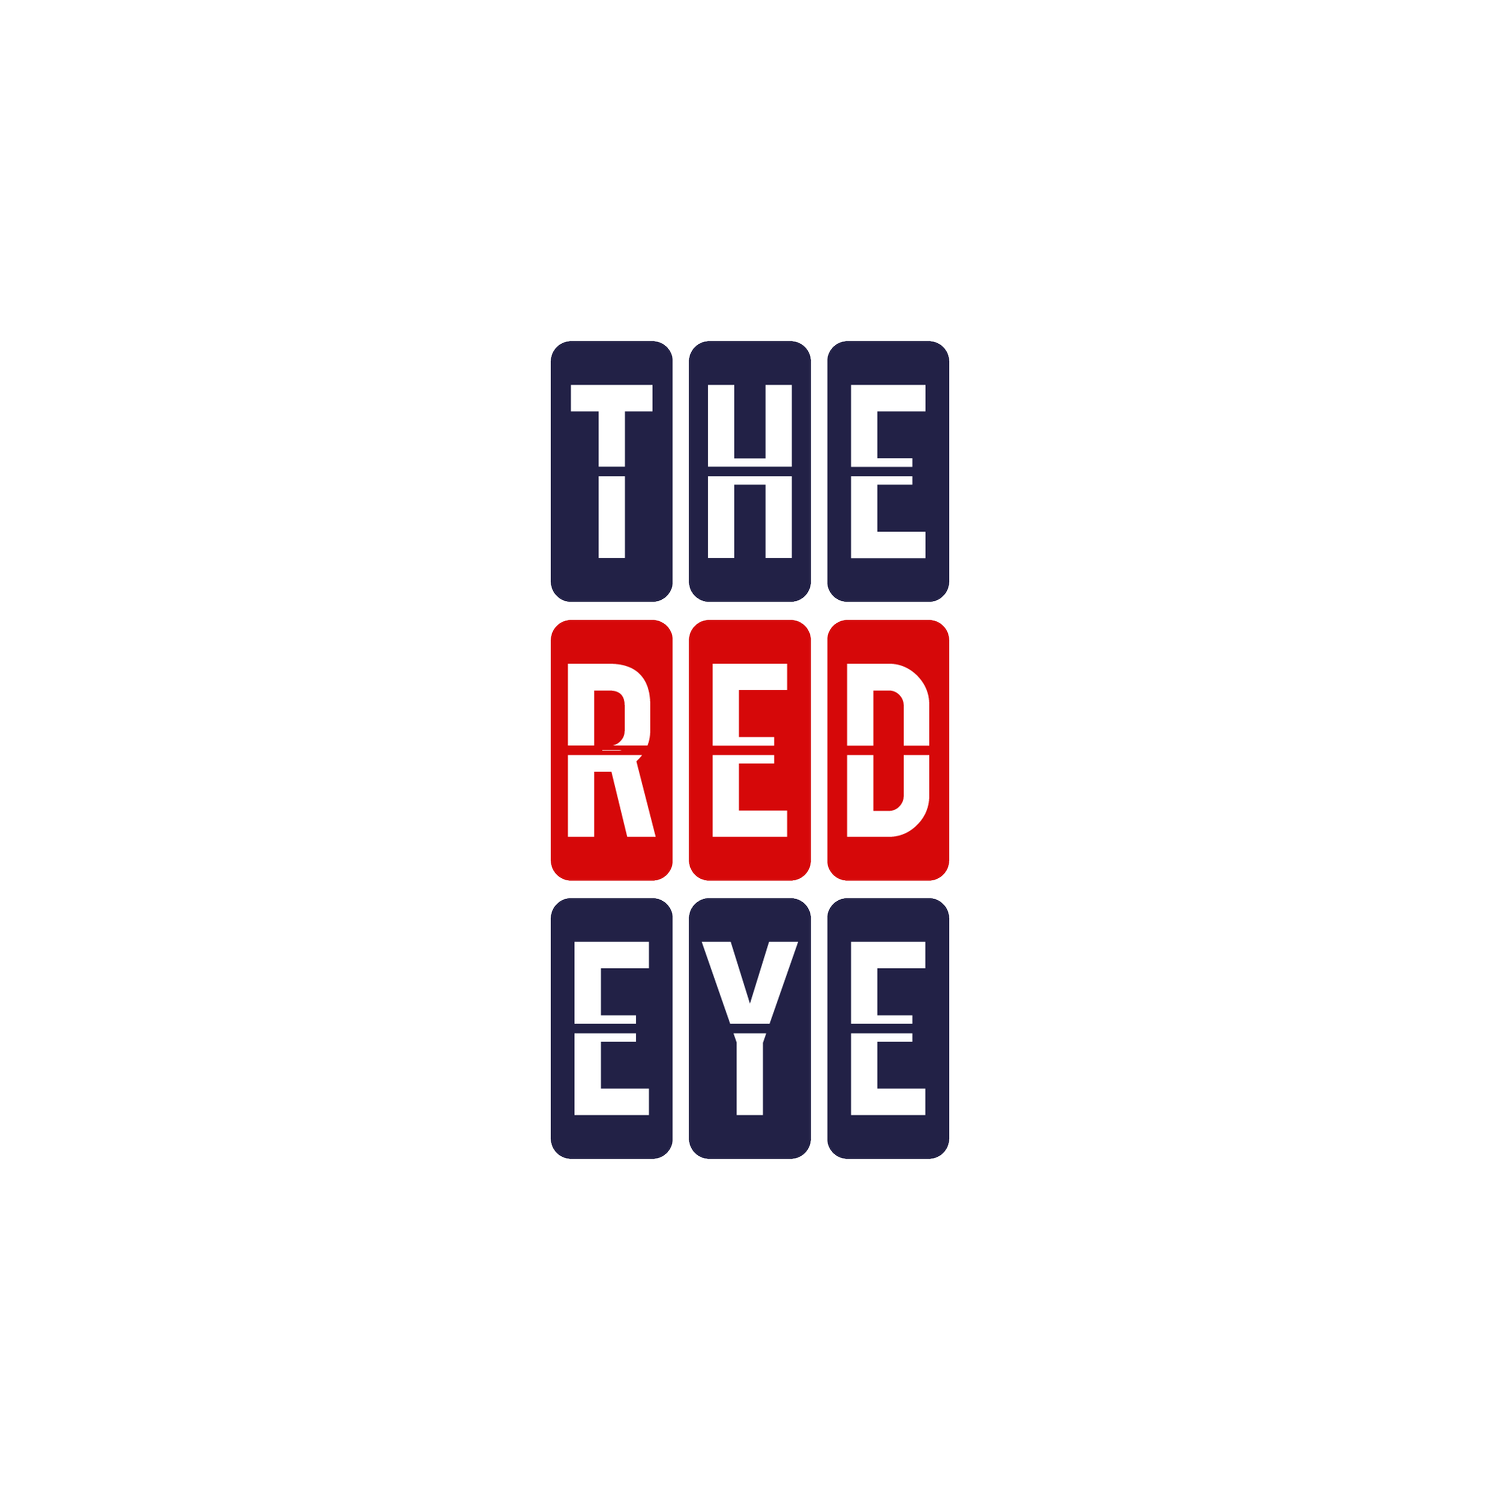 The Red Eye Podcast - Short Audio Stories about travelling the world as a flight attendant